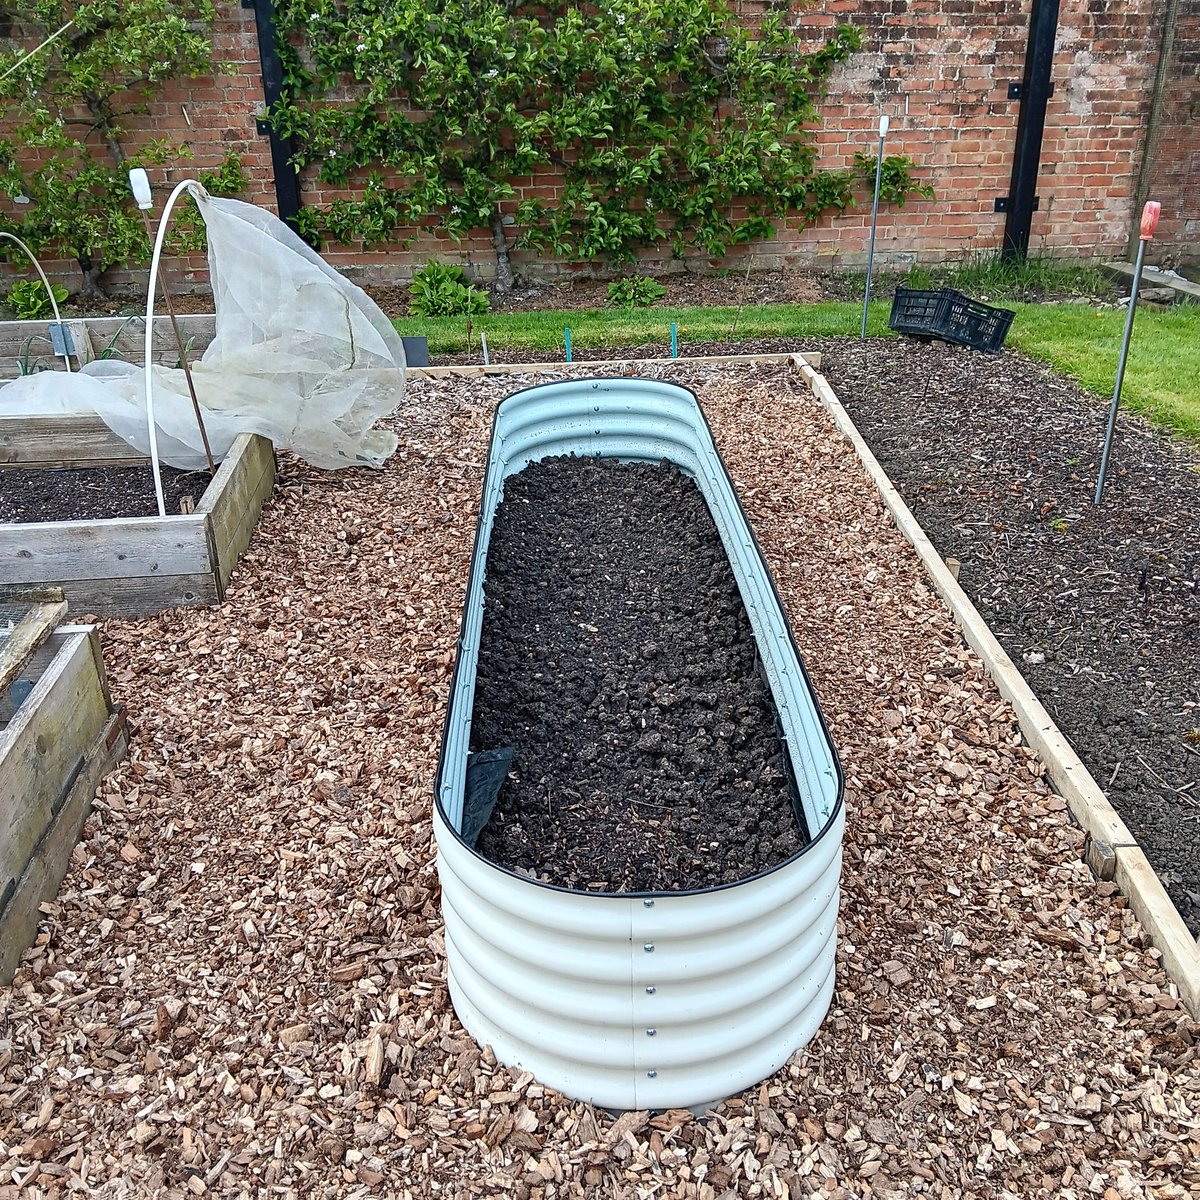 Renewing raised beds. Hope to get some long parsnips out of the new metal one after compost has gone in on top of the Warwickshire clay! @RobsAllotment @twkg